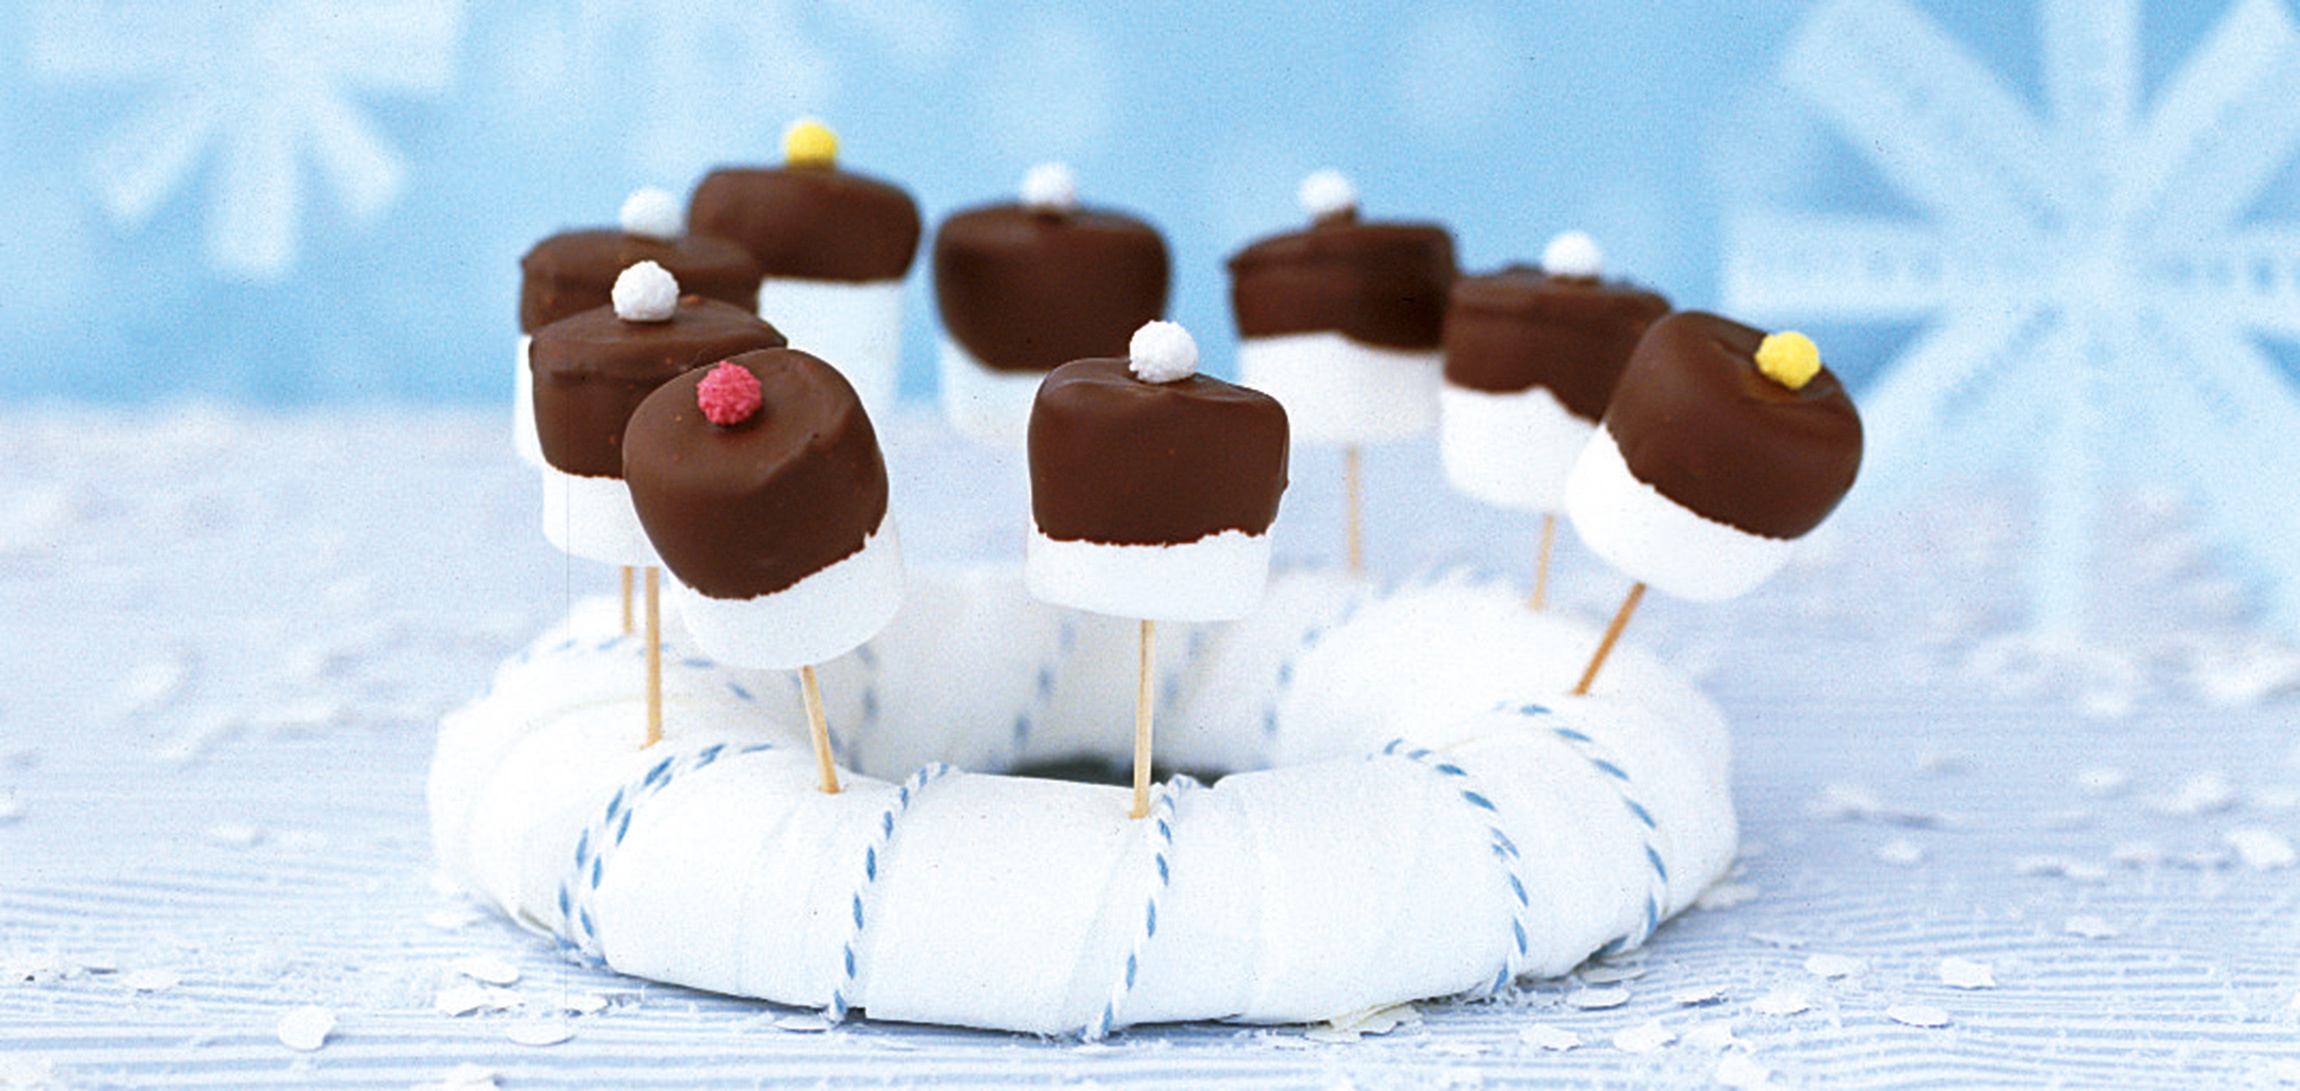 Marshmallow: Cake decorating, Coated with chocolate. 2300x1100 Dual Screen Background.